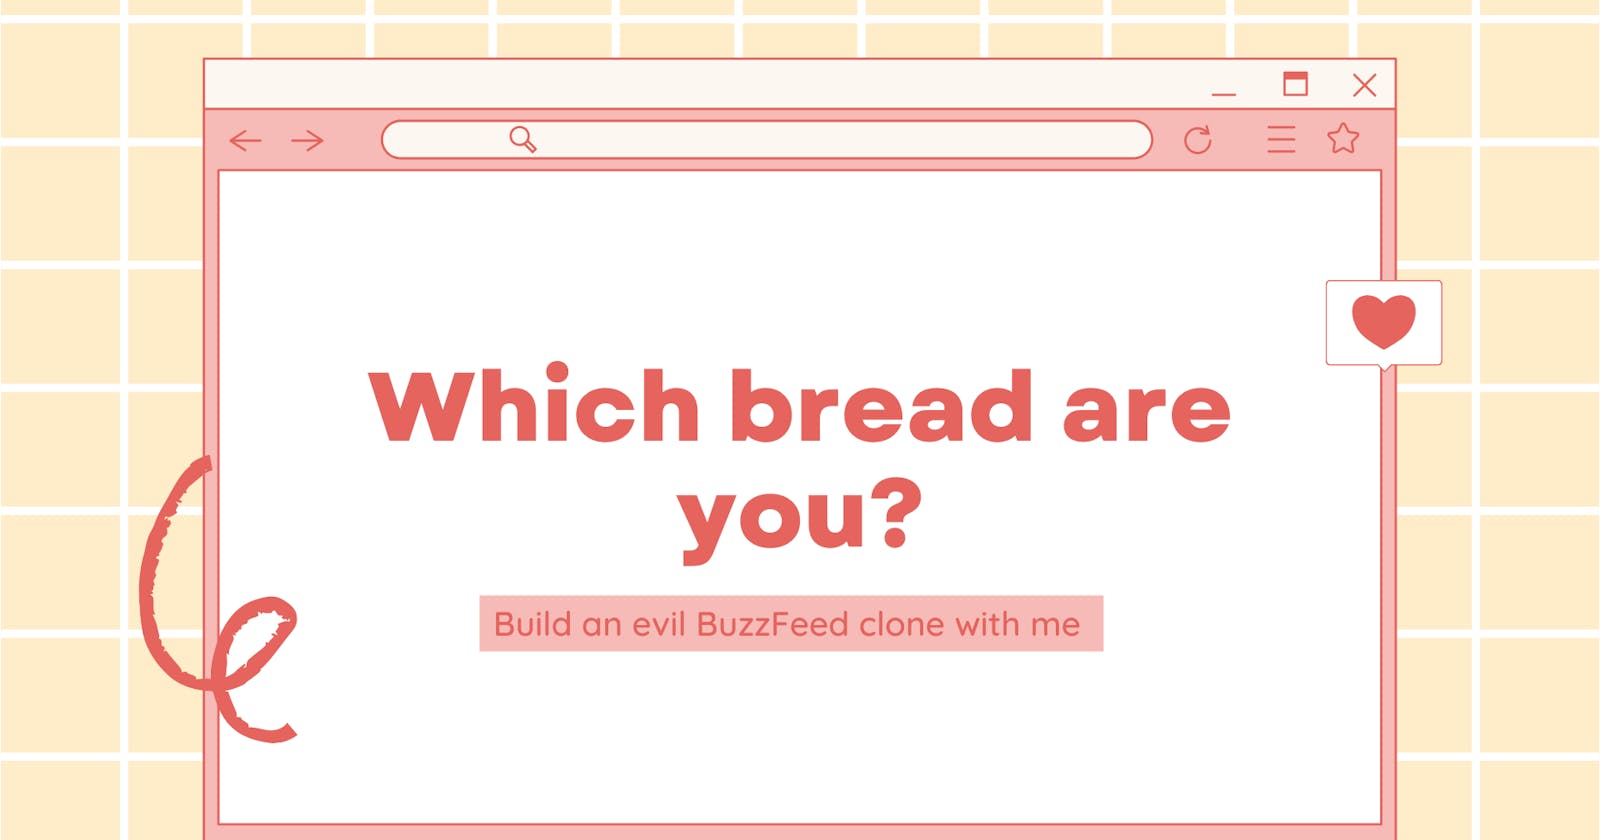 Build an evil BuzzFeed clone with me!